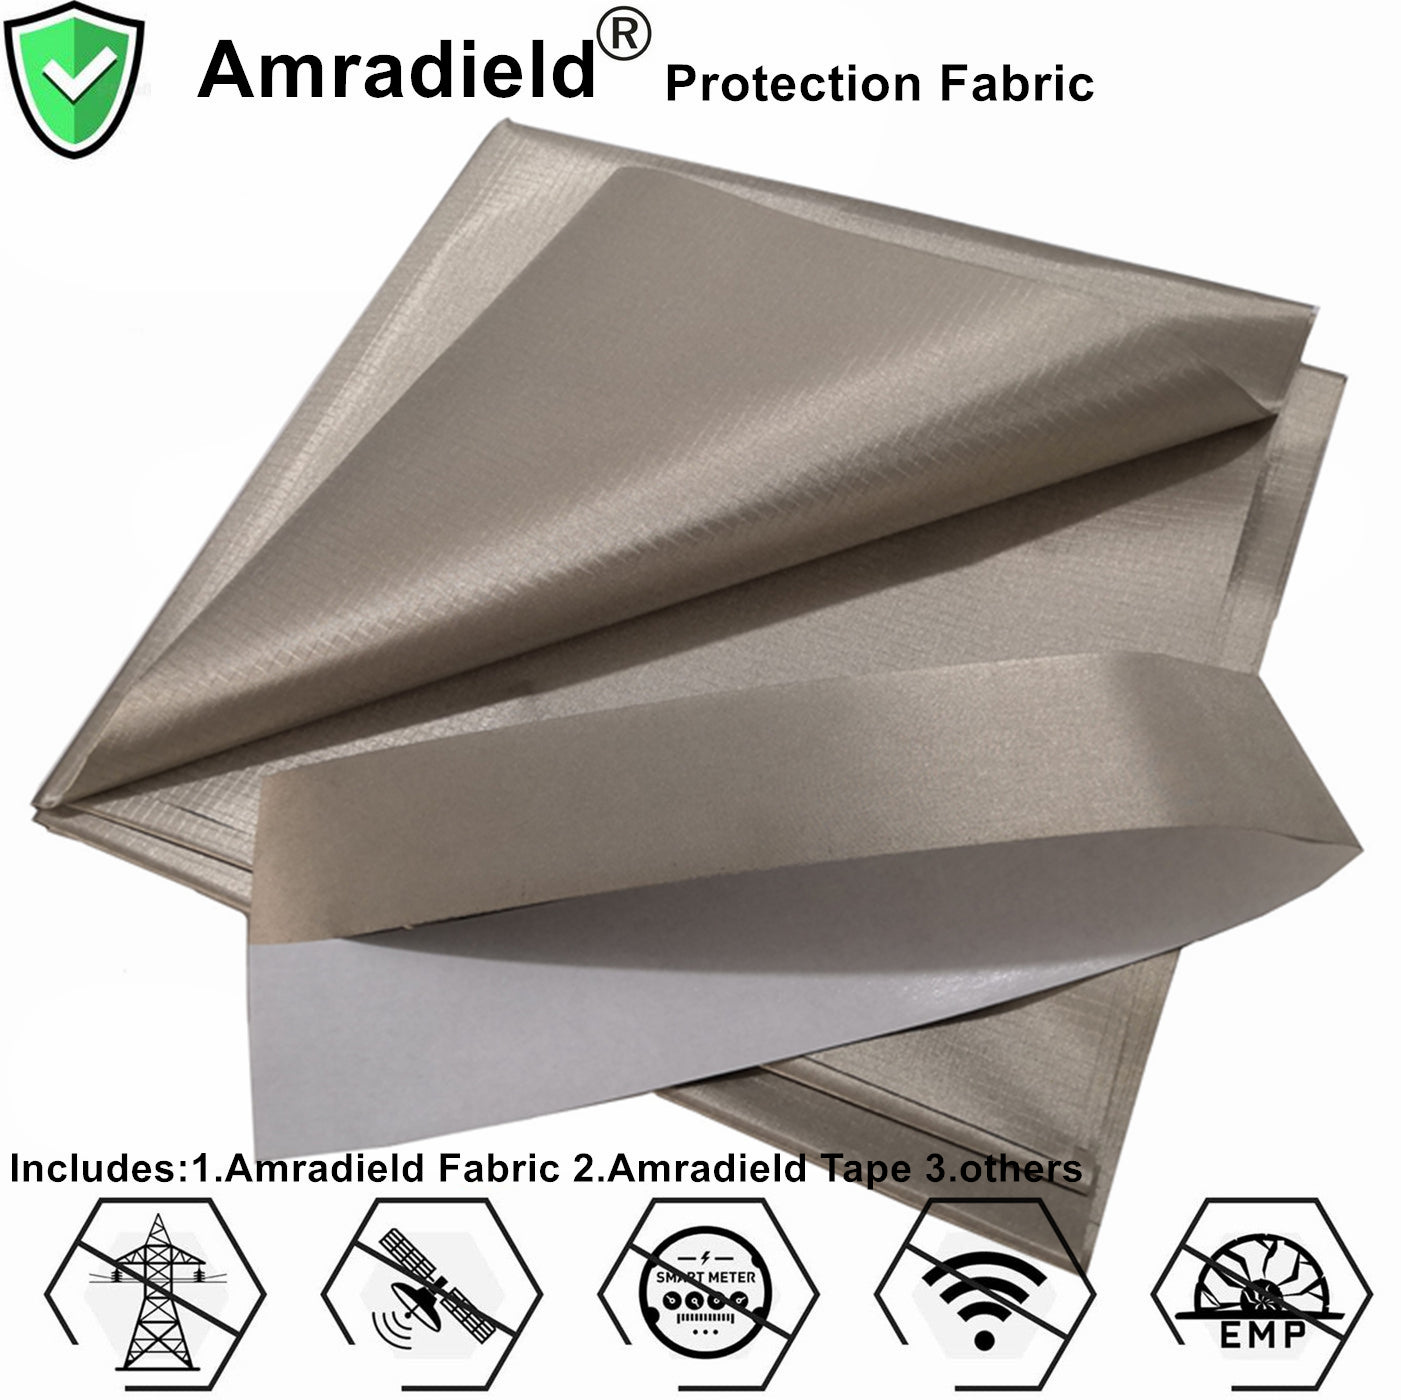 Faraday Fabric Faraday Cage Military Grade Conductive Material for Fabric  Protection EMP & Signal Blocking from Cellular Signal, WiFi, Bluetooth,  GPS